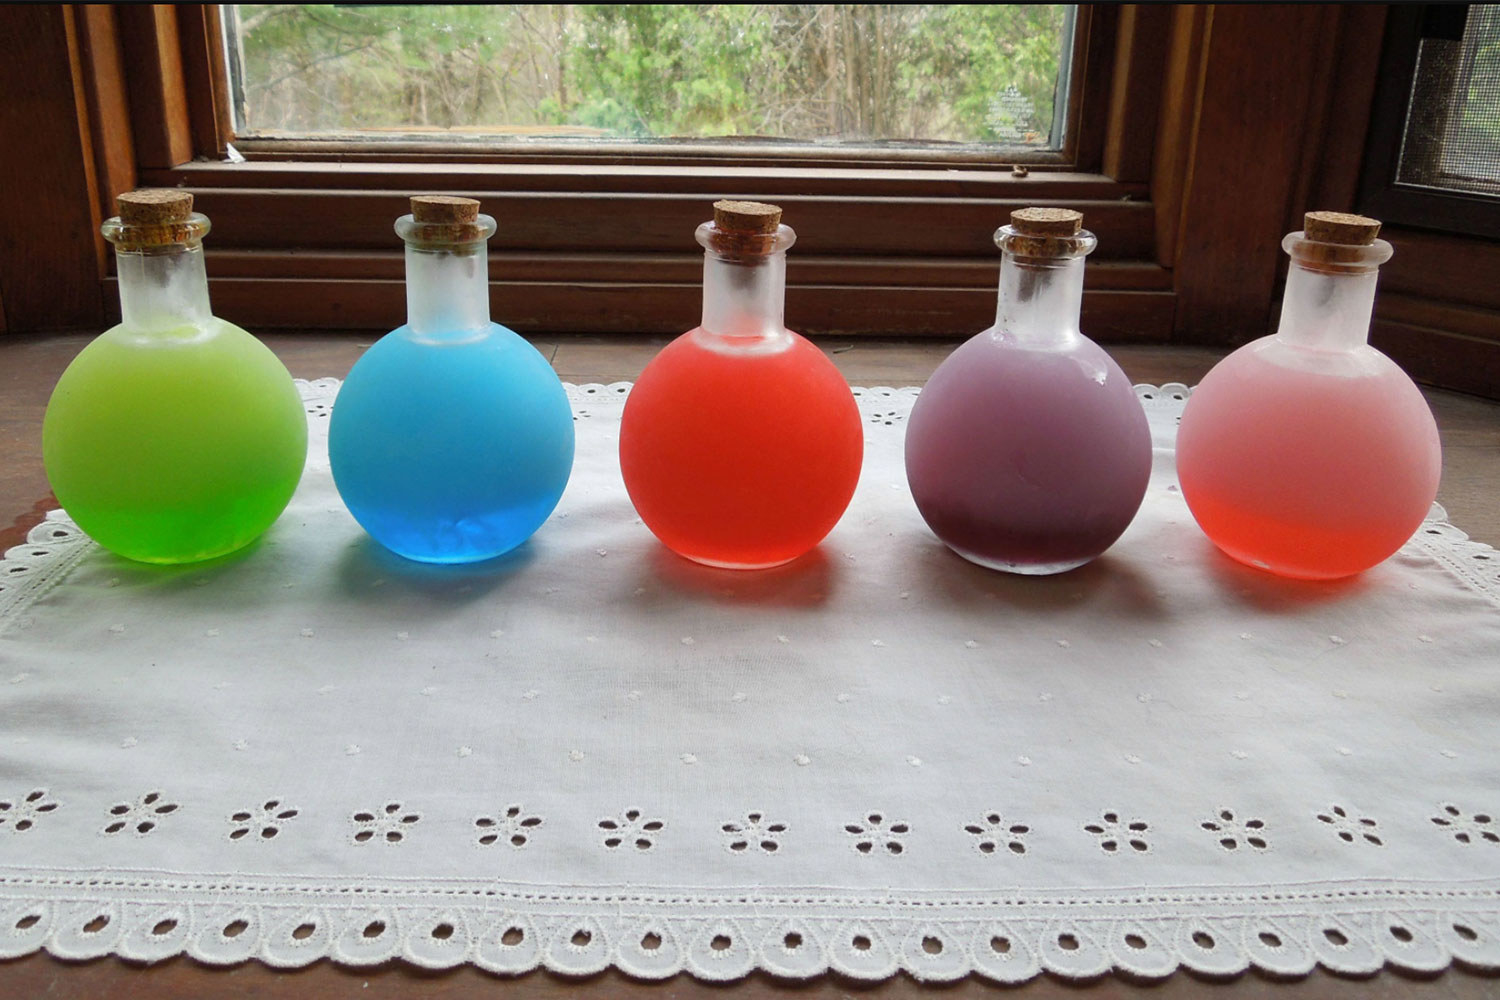 Different pitchers of colored vodka